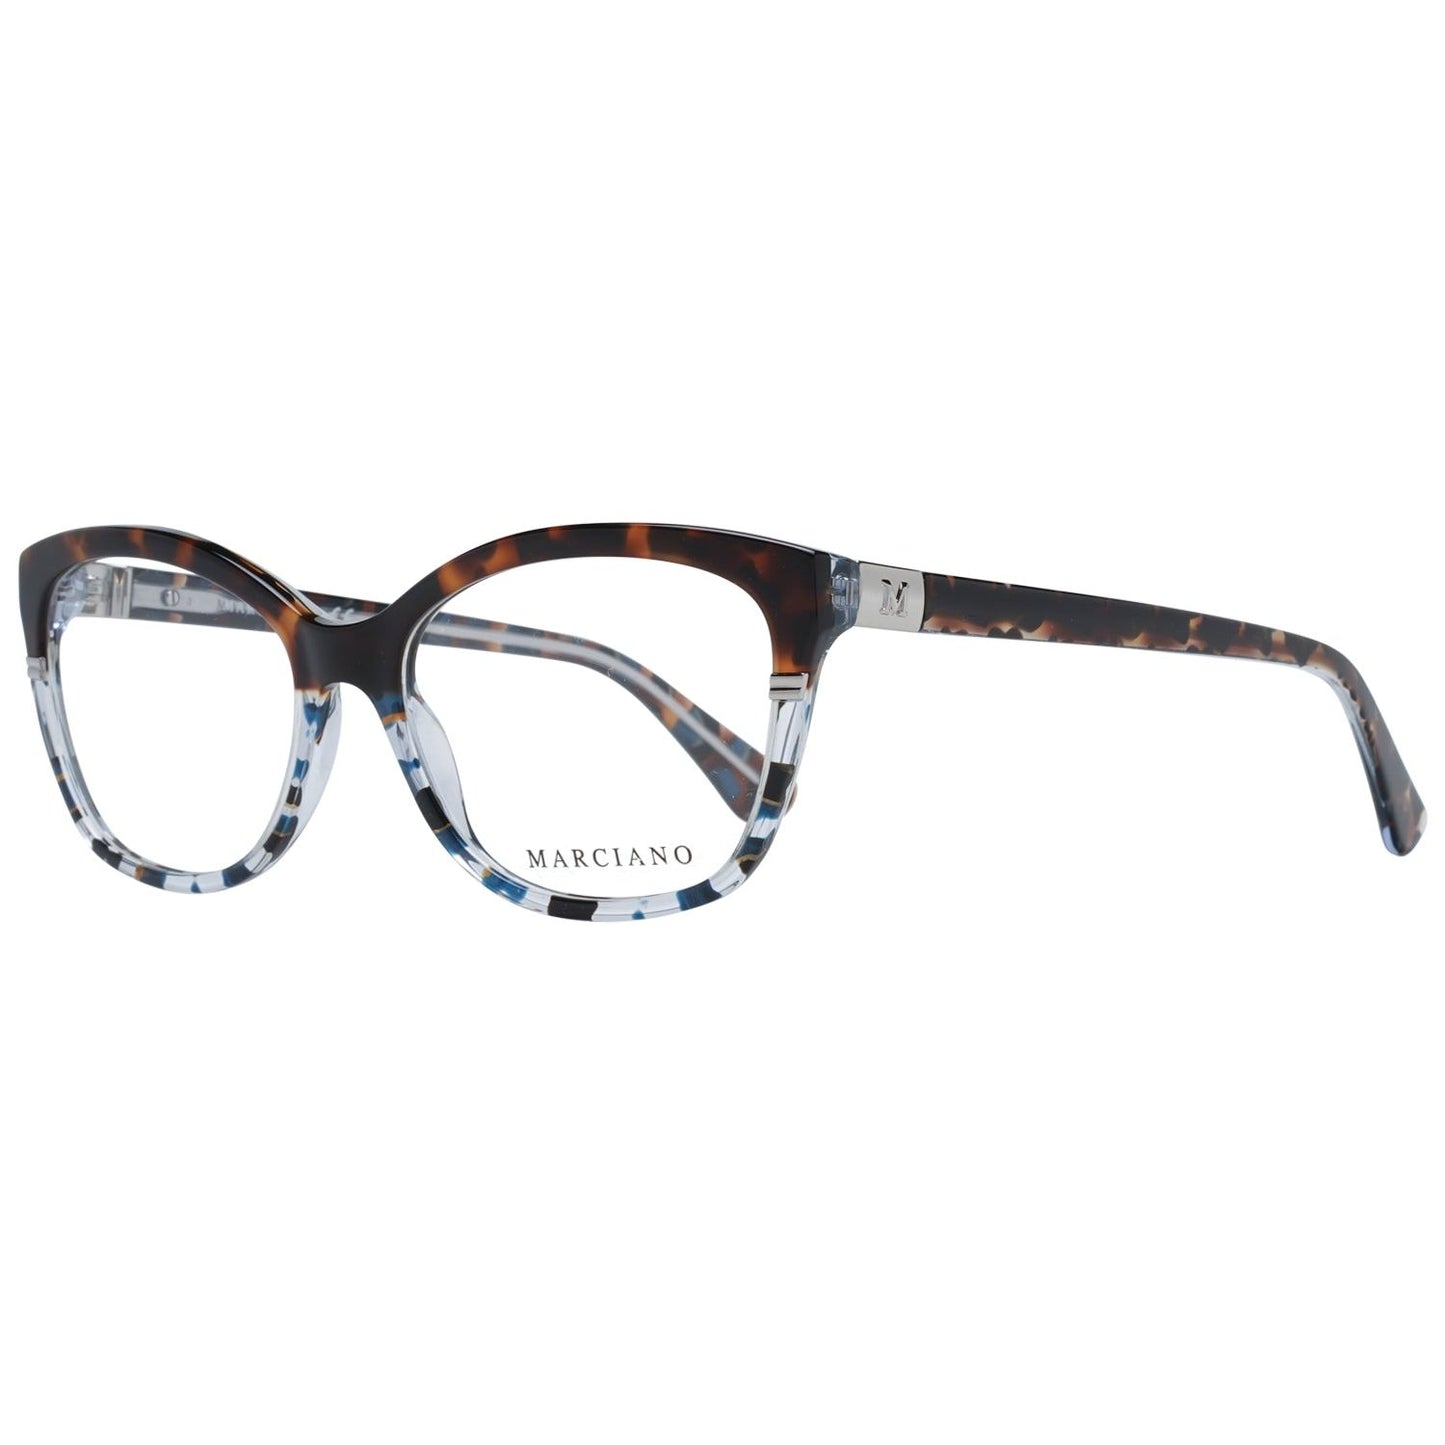 MARCIANO By GUESS EYEWEAR MARCIANO BY GUESS MOD. GM0374 54056 SUNGLASSES & EYEWEAR marciano-by-guess-mod-gm0374-54056